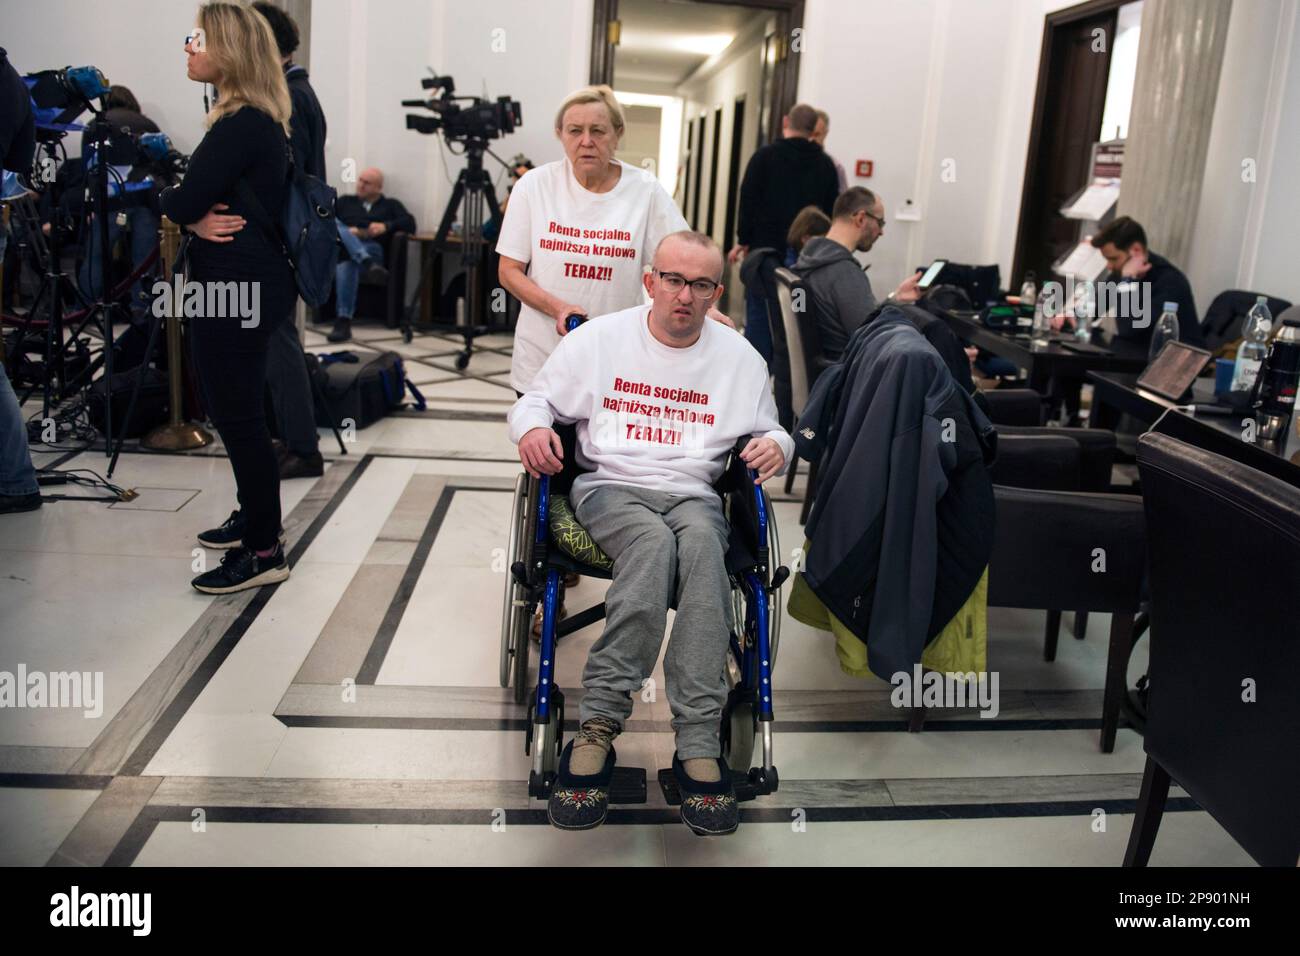 A mother of differently abled man named Andrzej Sucholewski is pushing his wheelchair at the Parliamentary corridor. It is the 4th day since a group of Persons with disabilities along with their parents and care takers gathered in the Sejm (lower house of Parliament) on Monday 6th of March, demanding that the social pension be equalized with the national minimum. Among the protesters in the Sejm is also MP - Iwona Hartwich with her disabled son, Jakub. The PO's (Civic Platform) MP informed during a press conference that people with disabilities are submitting a draft act on social pension, aft Stock Photo